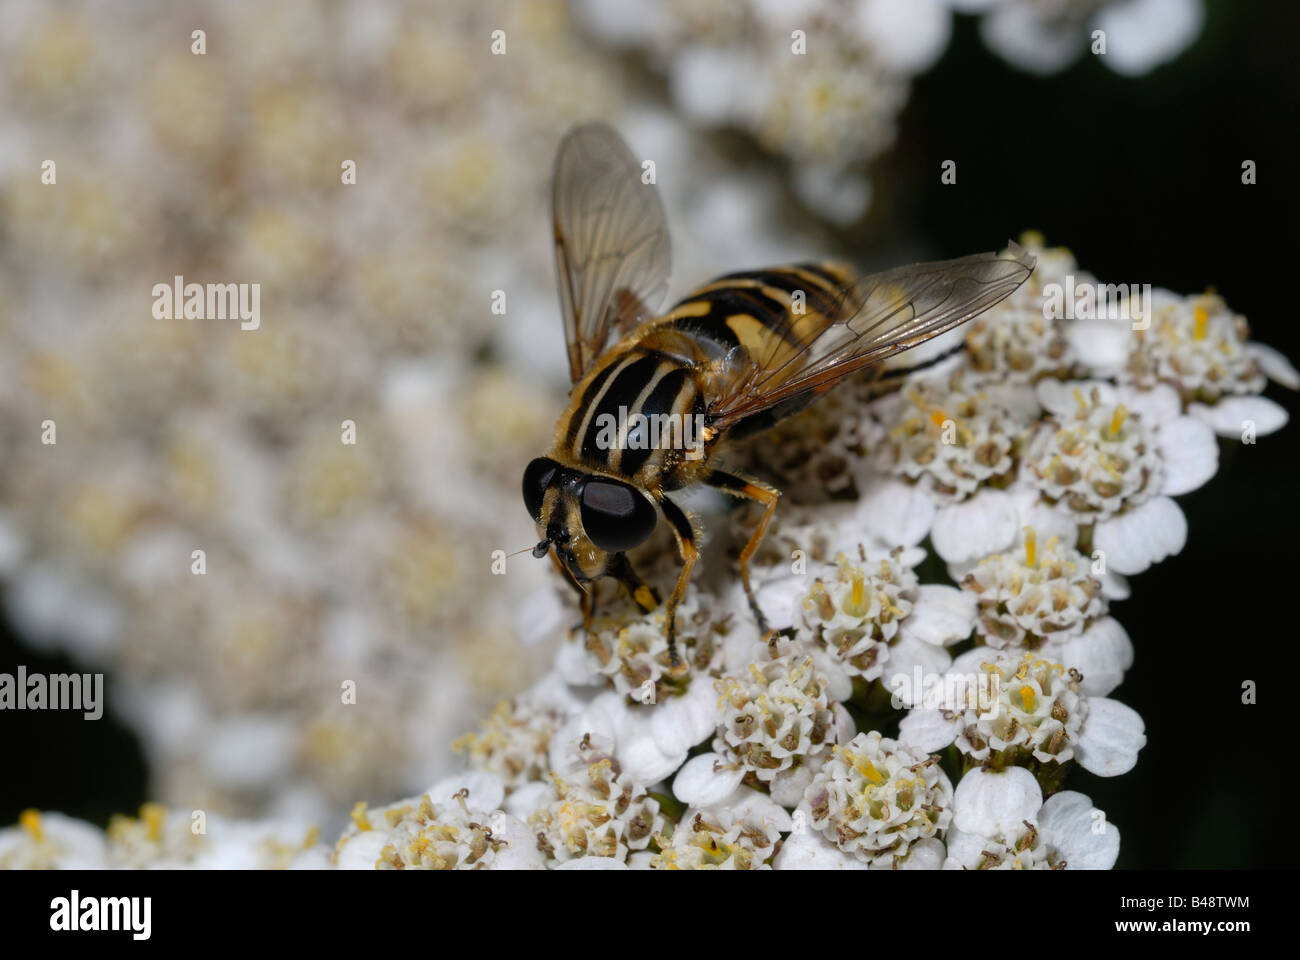 Hoverfly Helophilus pendulus, Galles, Regno Unito. Foto Stock